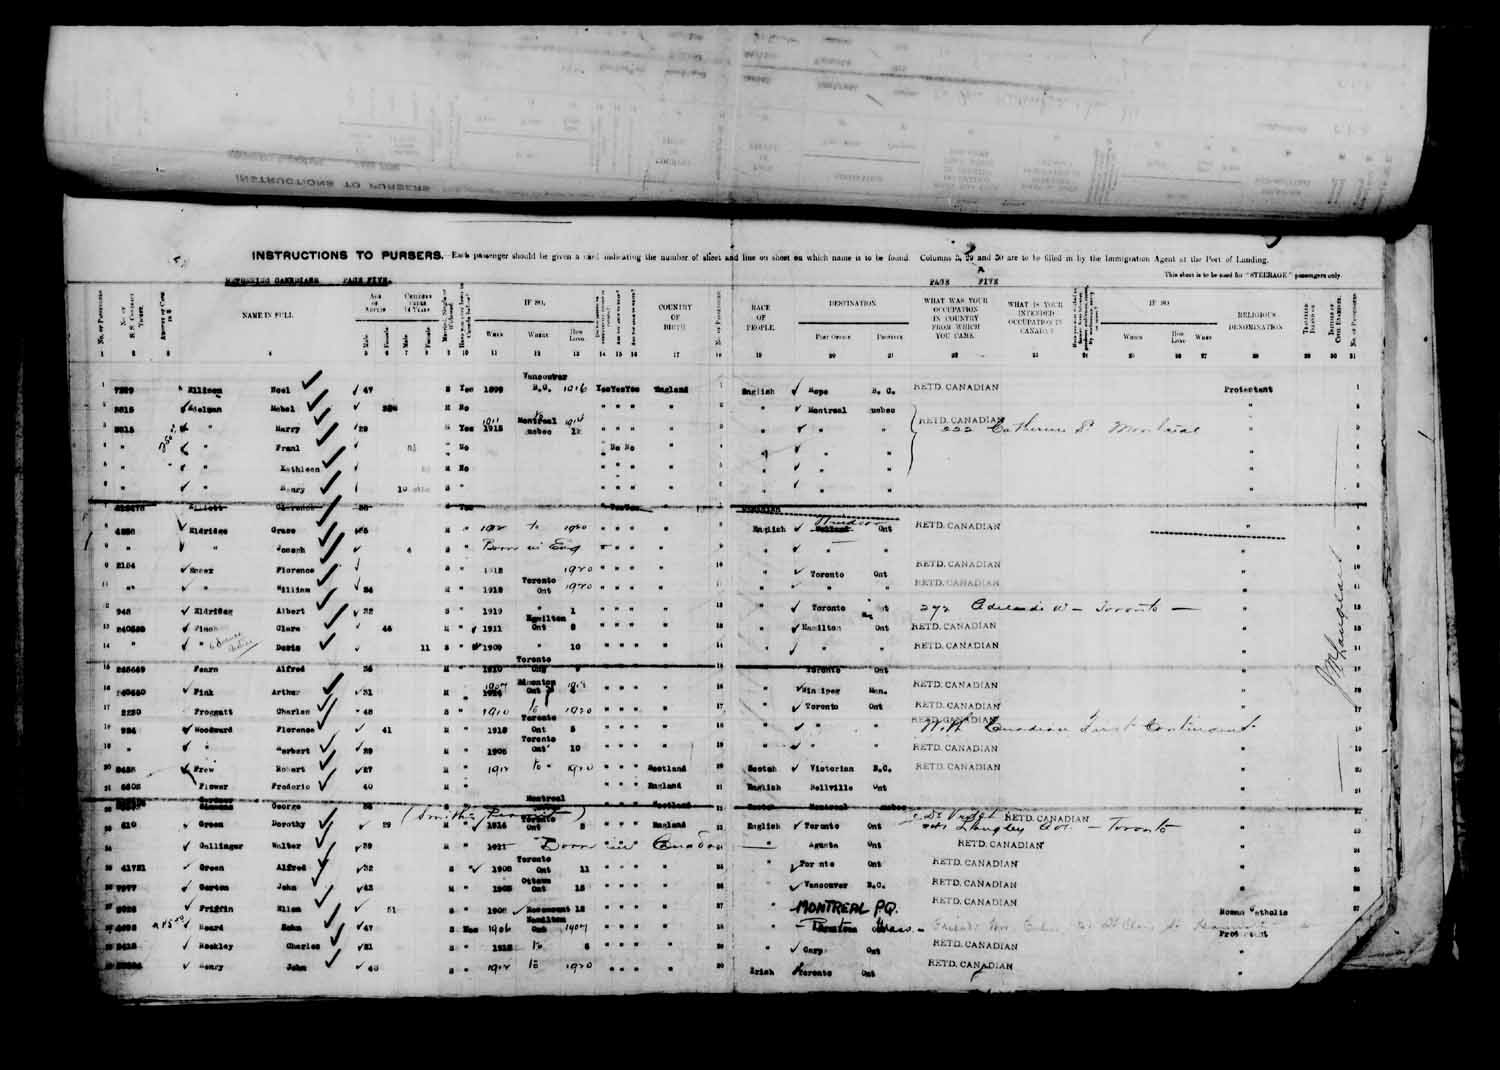 Digitized page of Passenger Lists for Image No.: e003610632